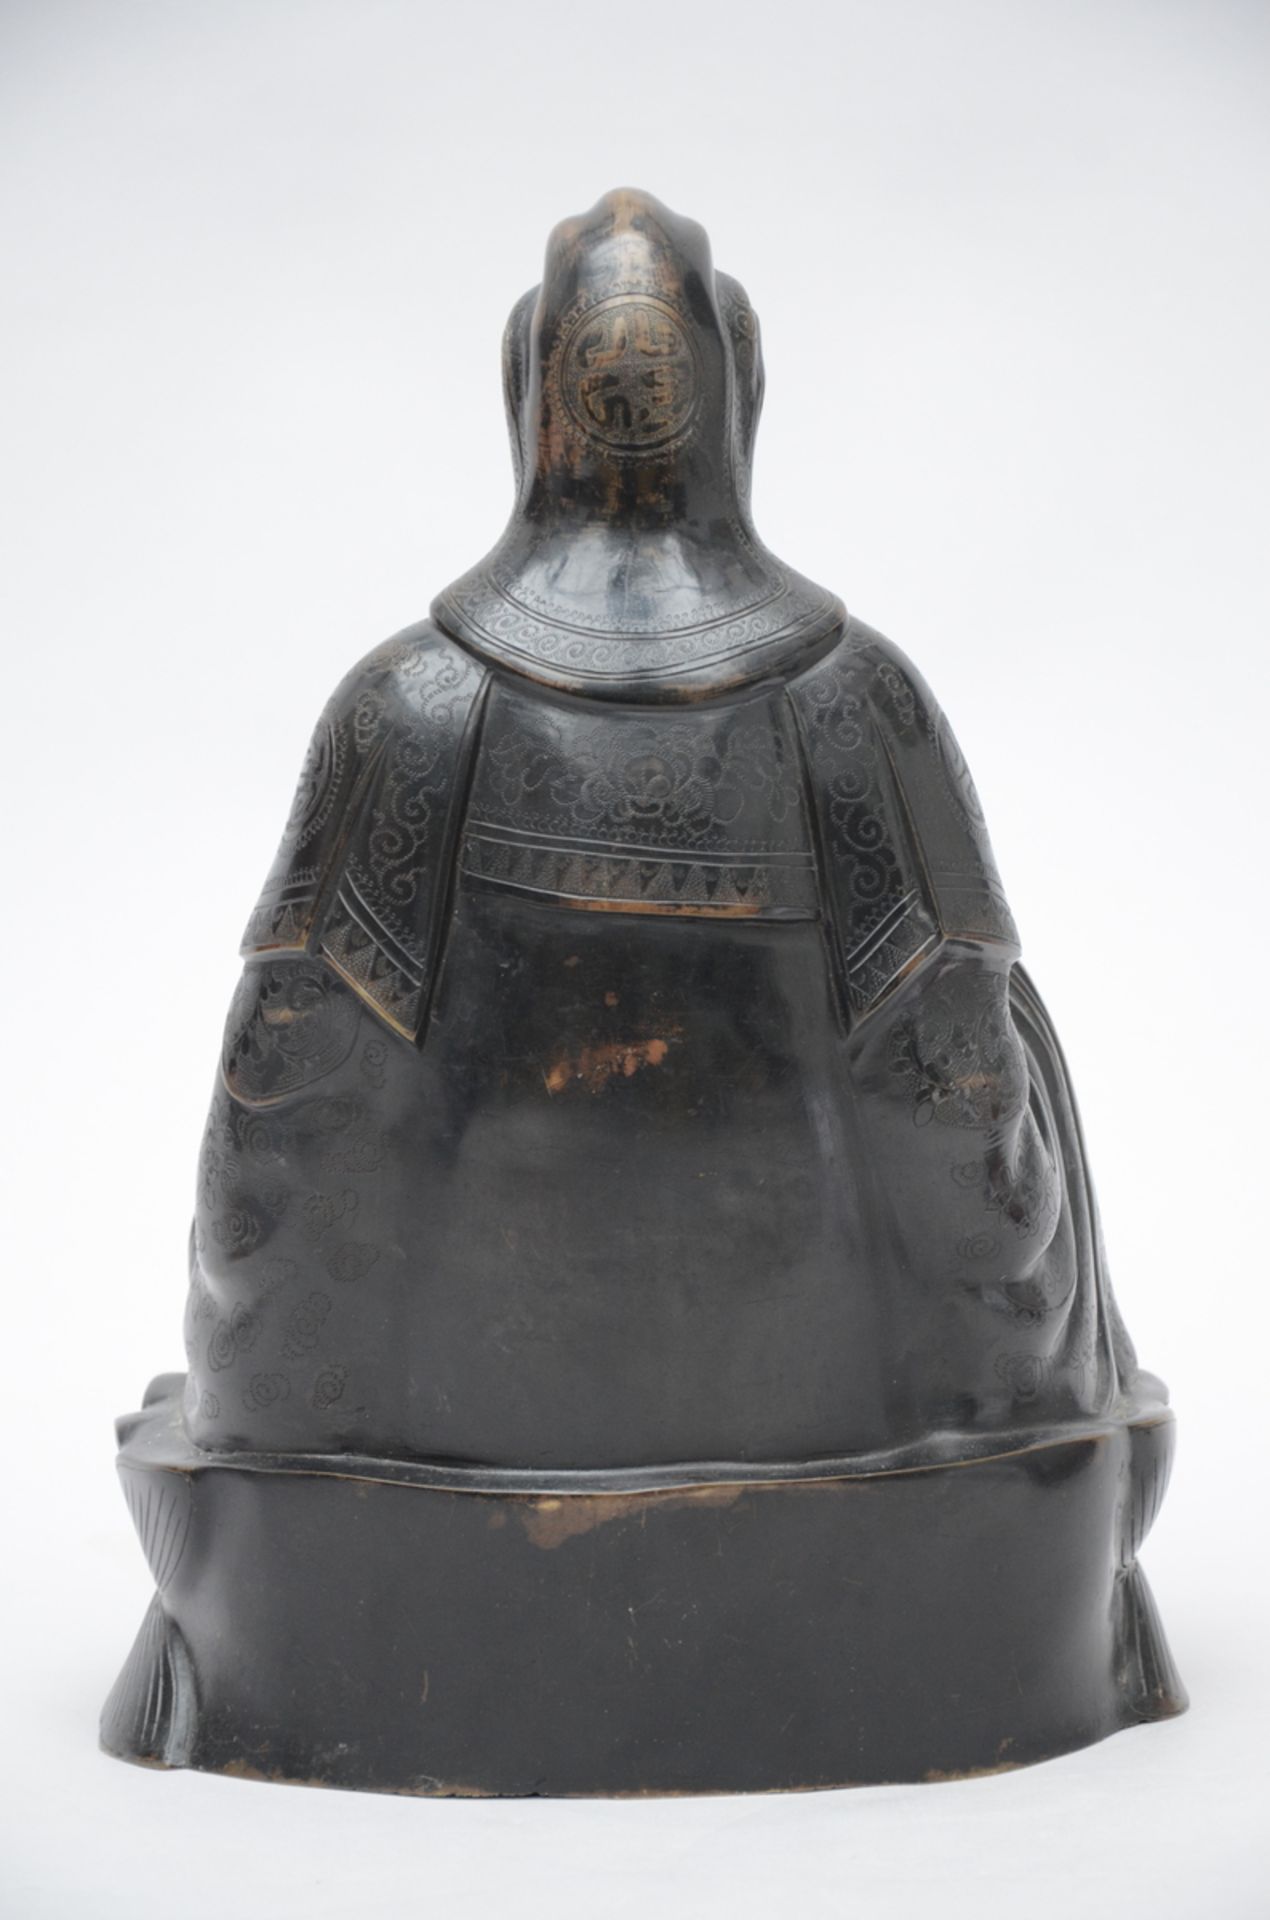 A Buddhist sculpture in bronze, Asia (38 cm) - Image 2 of 5